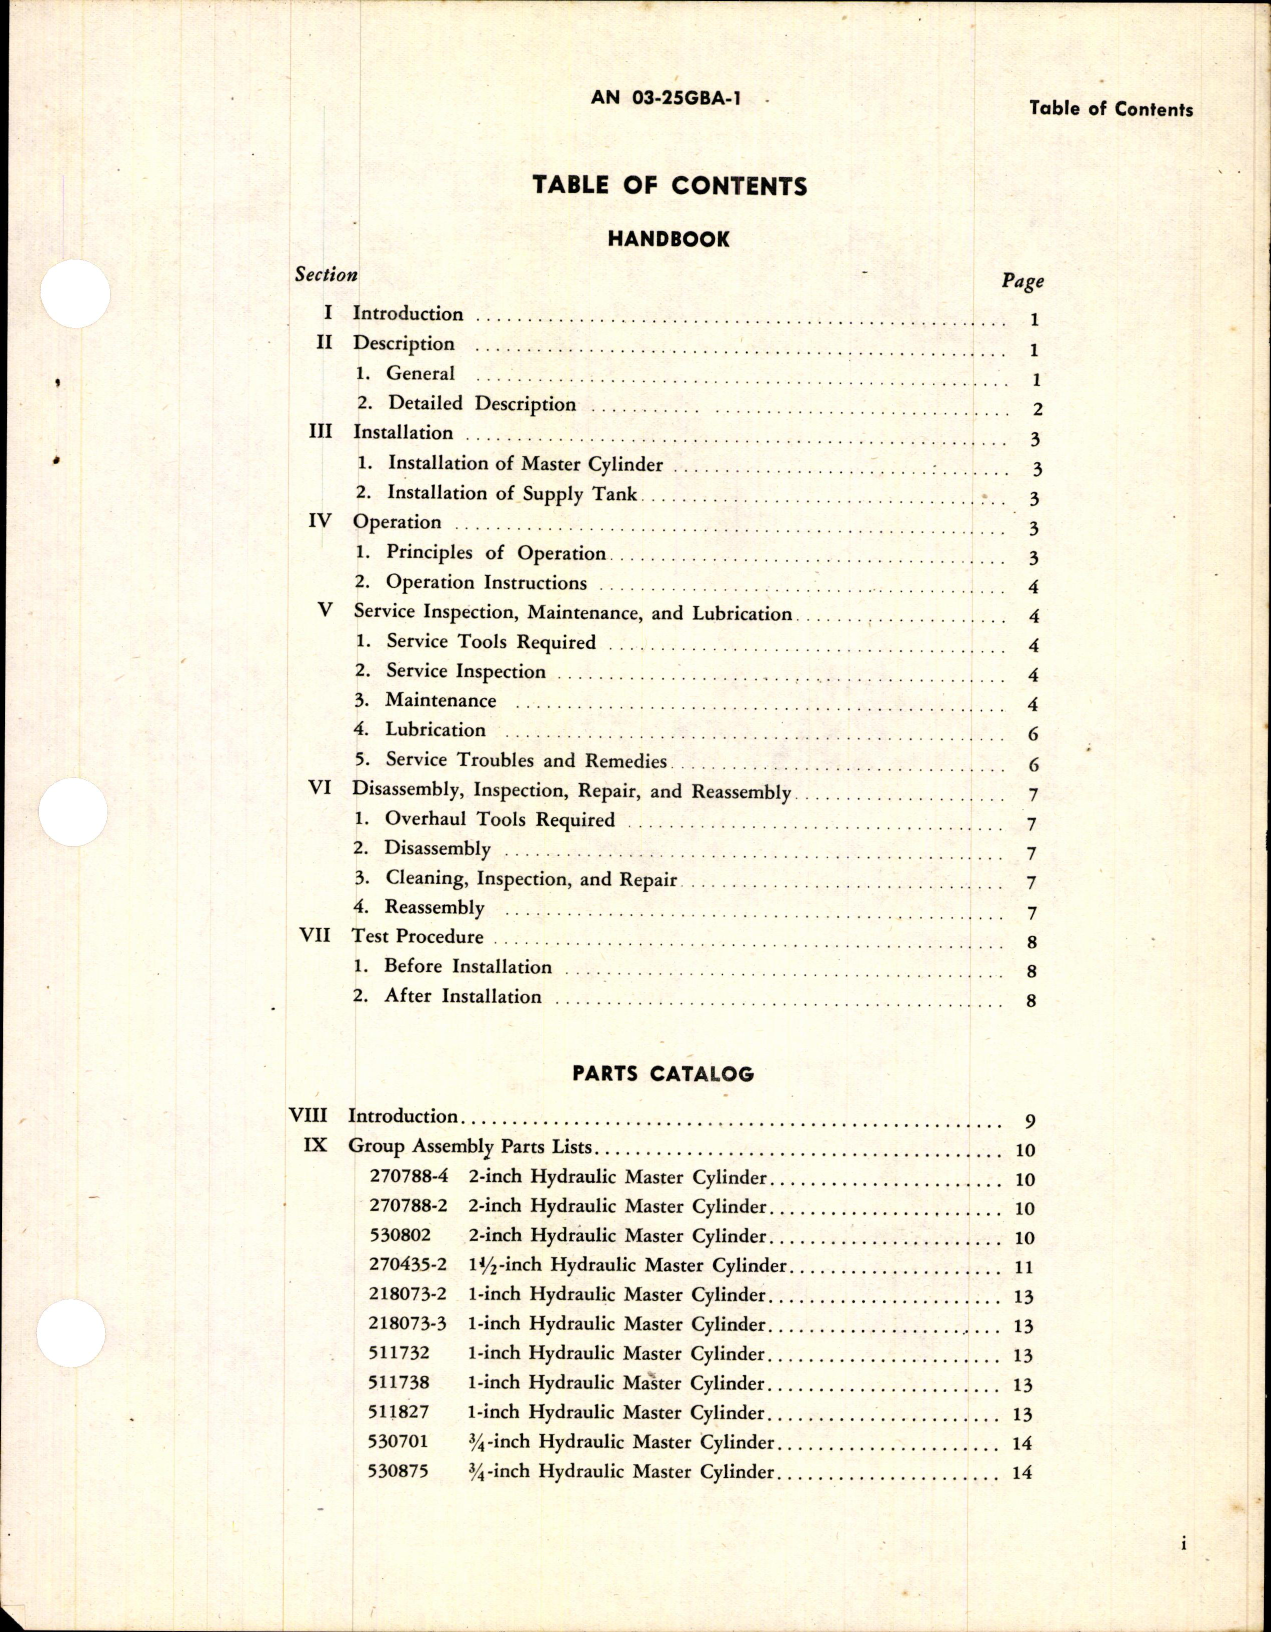 Sample page 3 from AirCorps Library document: Instructions with Parts Catalog for Master Brake Cylinders